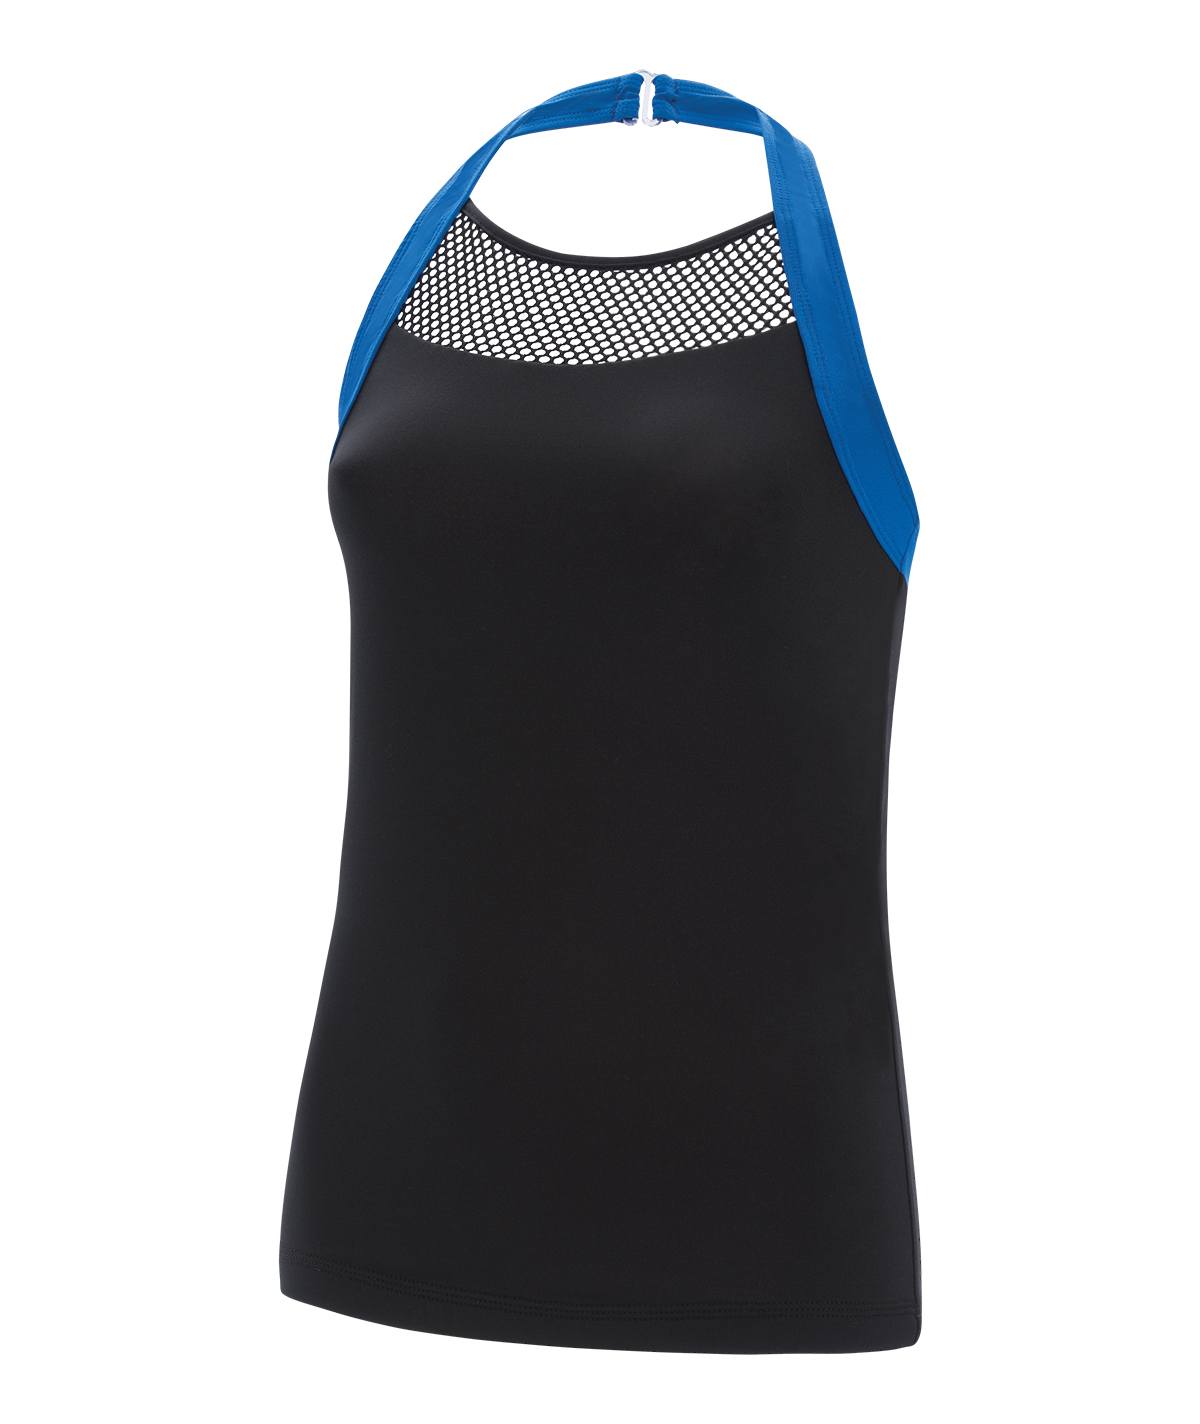 GK All Star Black Long Halter Top with Mesh Inset